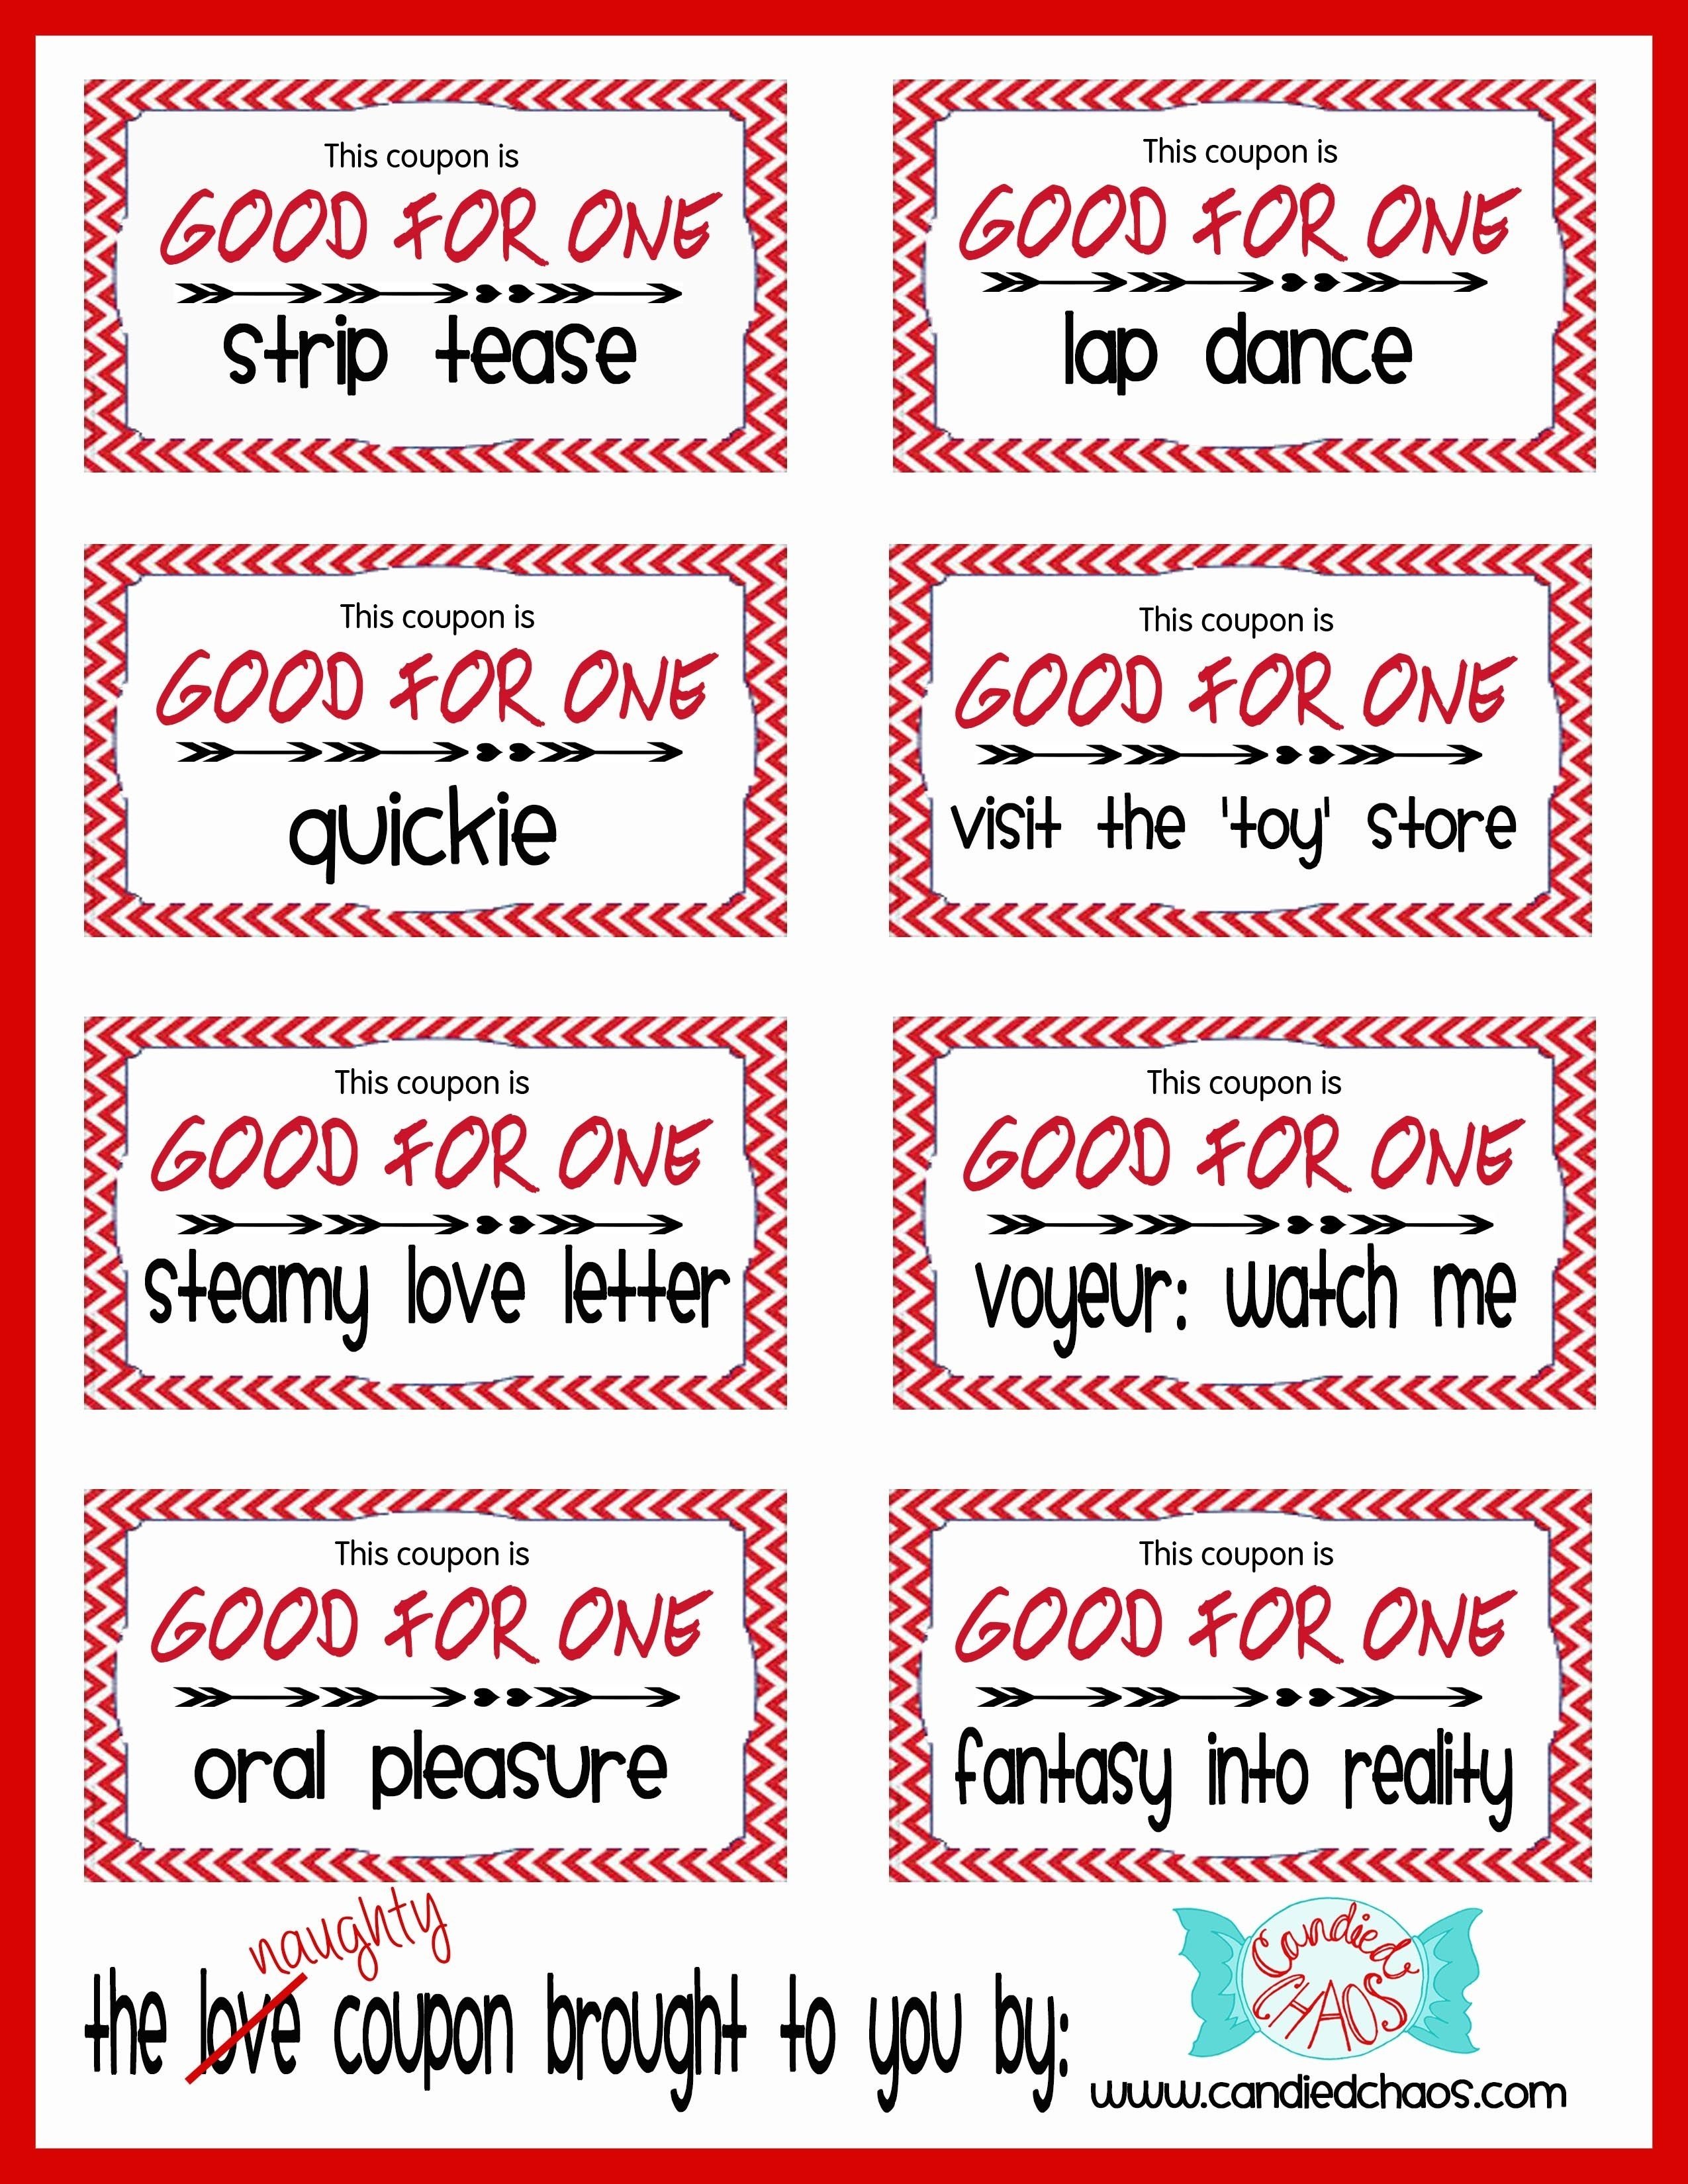 10 Unique Coupon Book Ideas For Husband naughty coupons love this idea valentines pinterest coupons 7 2022